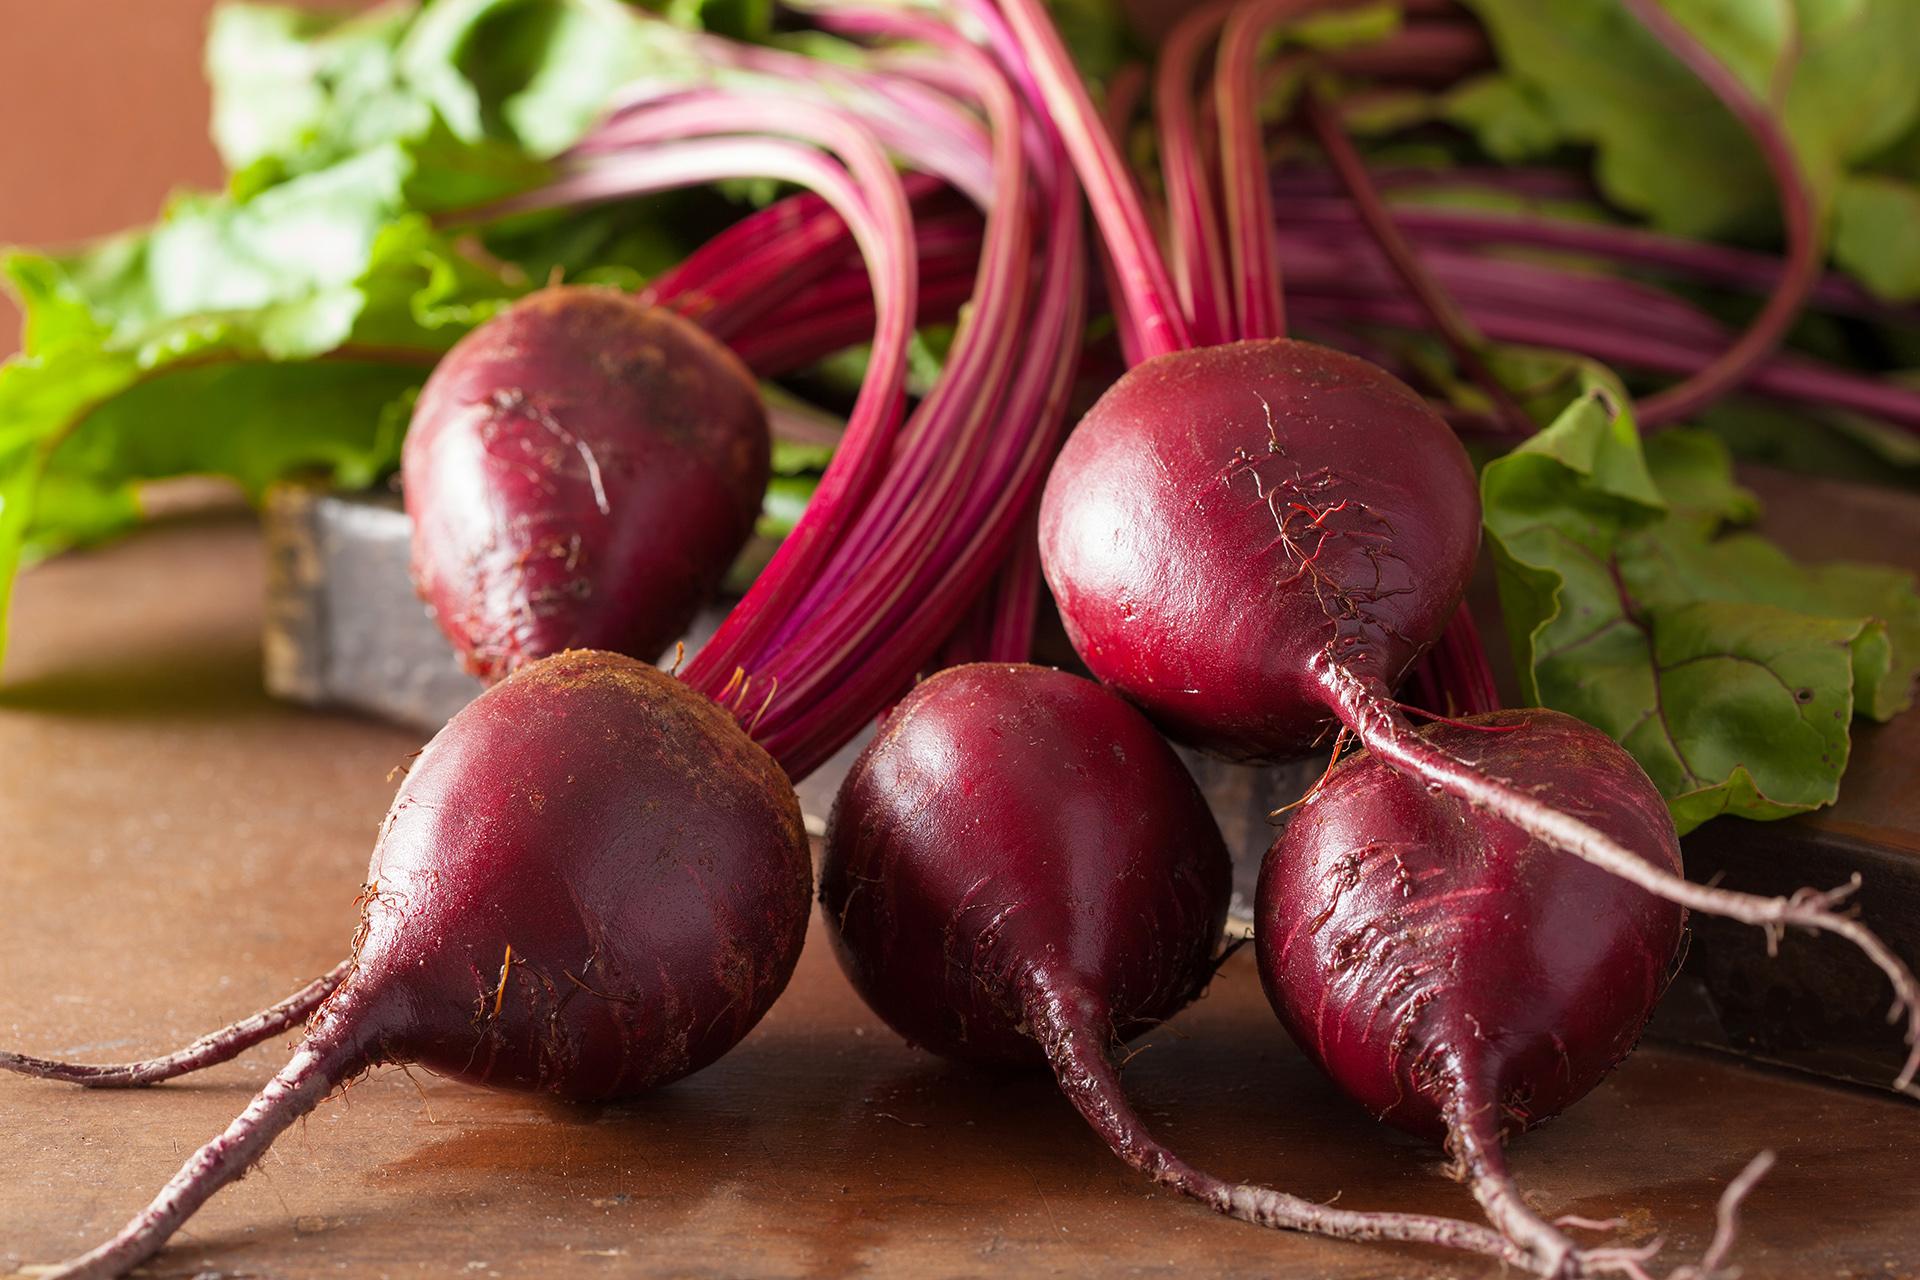 Beetroot: Nutritional Facts, Health Benefits, Other Uses